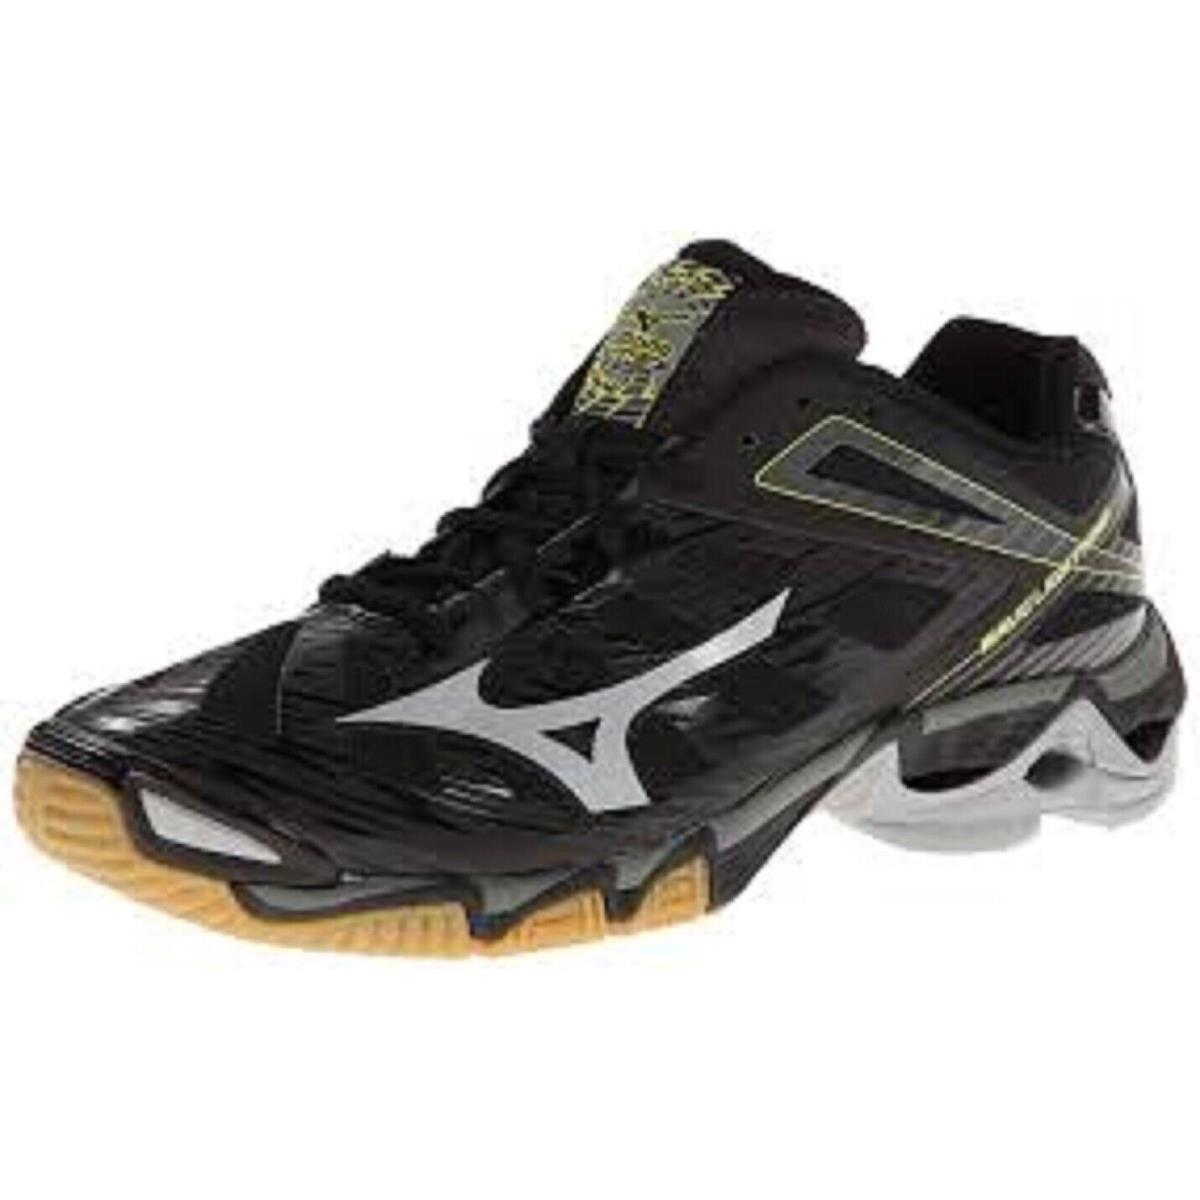 Mizuno Wave Lightning RX3 Women s Indoor Volleyball Shoes Size 9.5